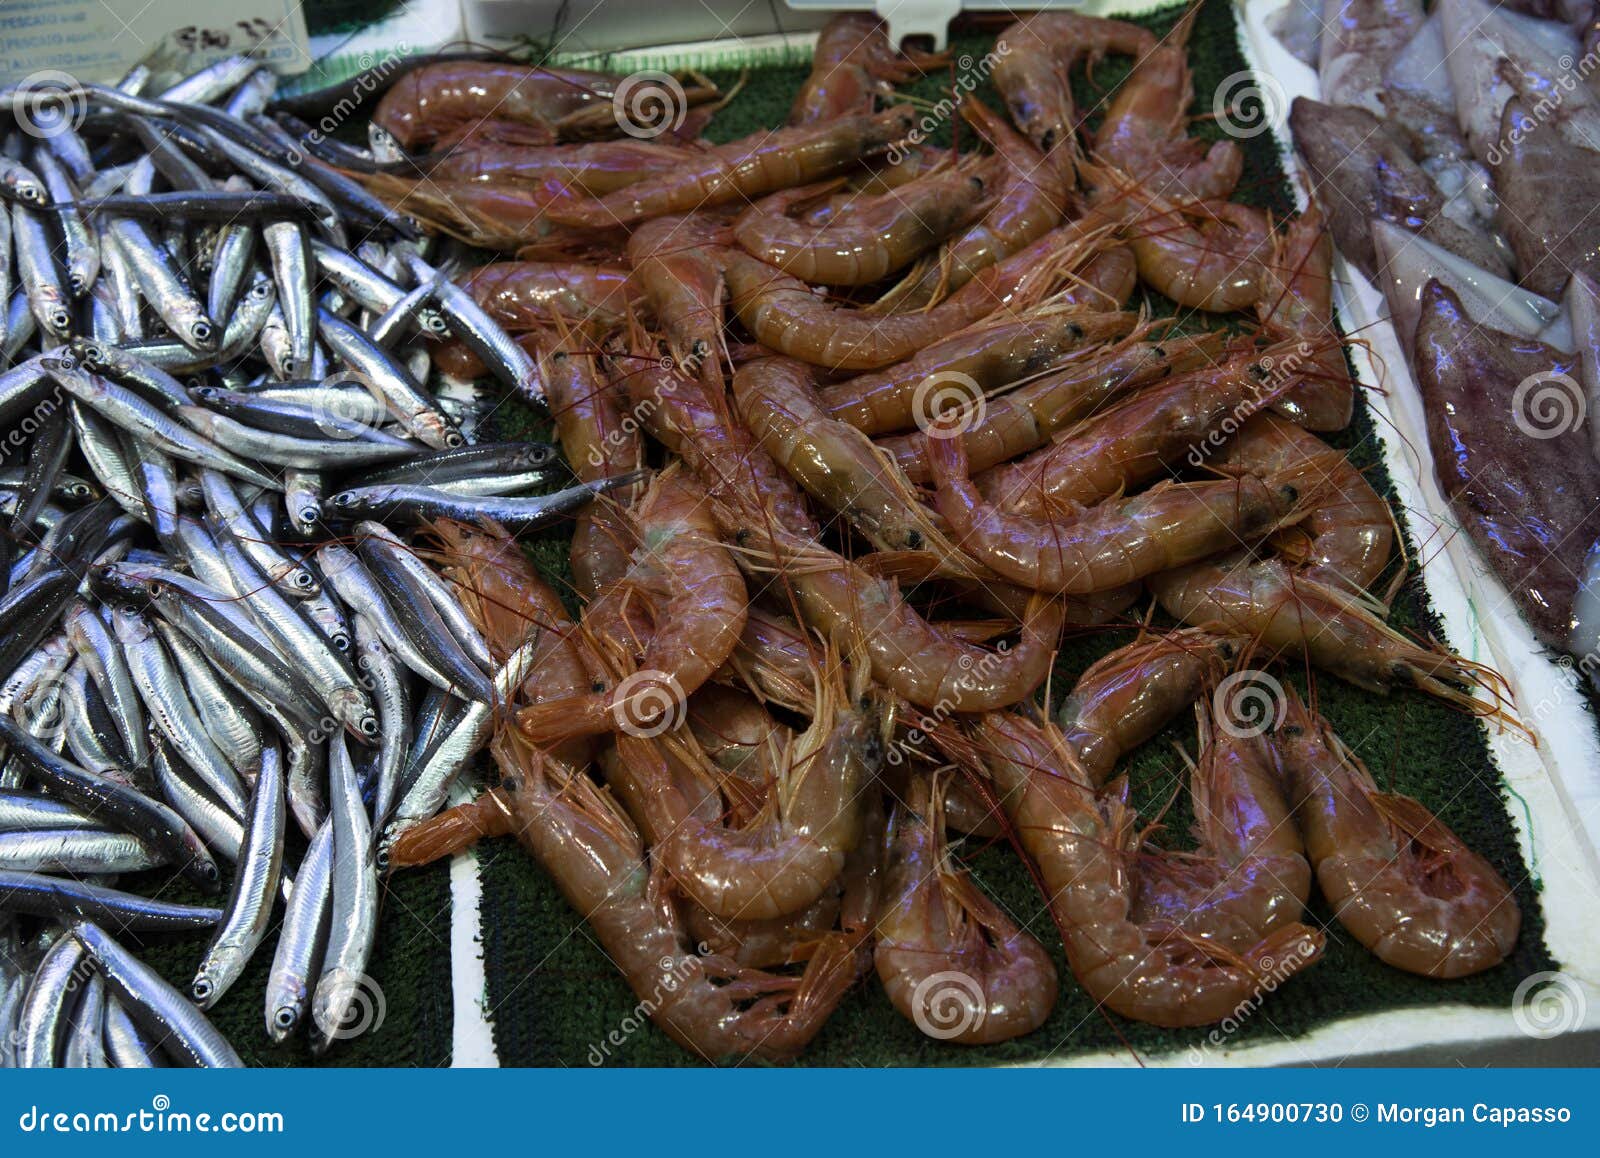 Daily Fish Market In Rome Stock Photo Image Of Background